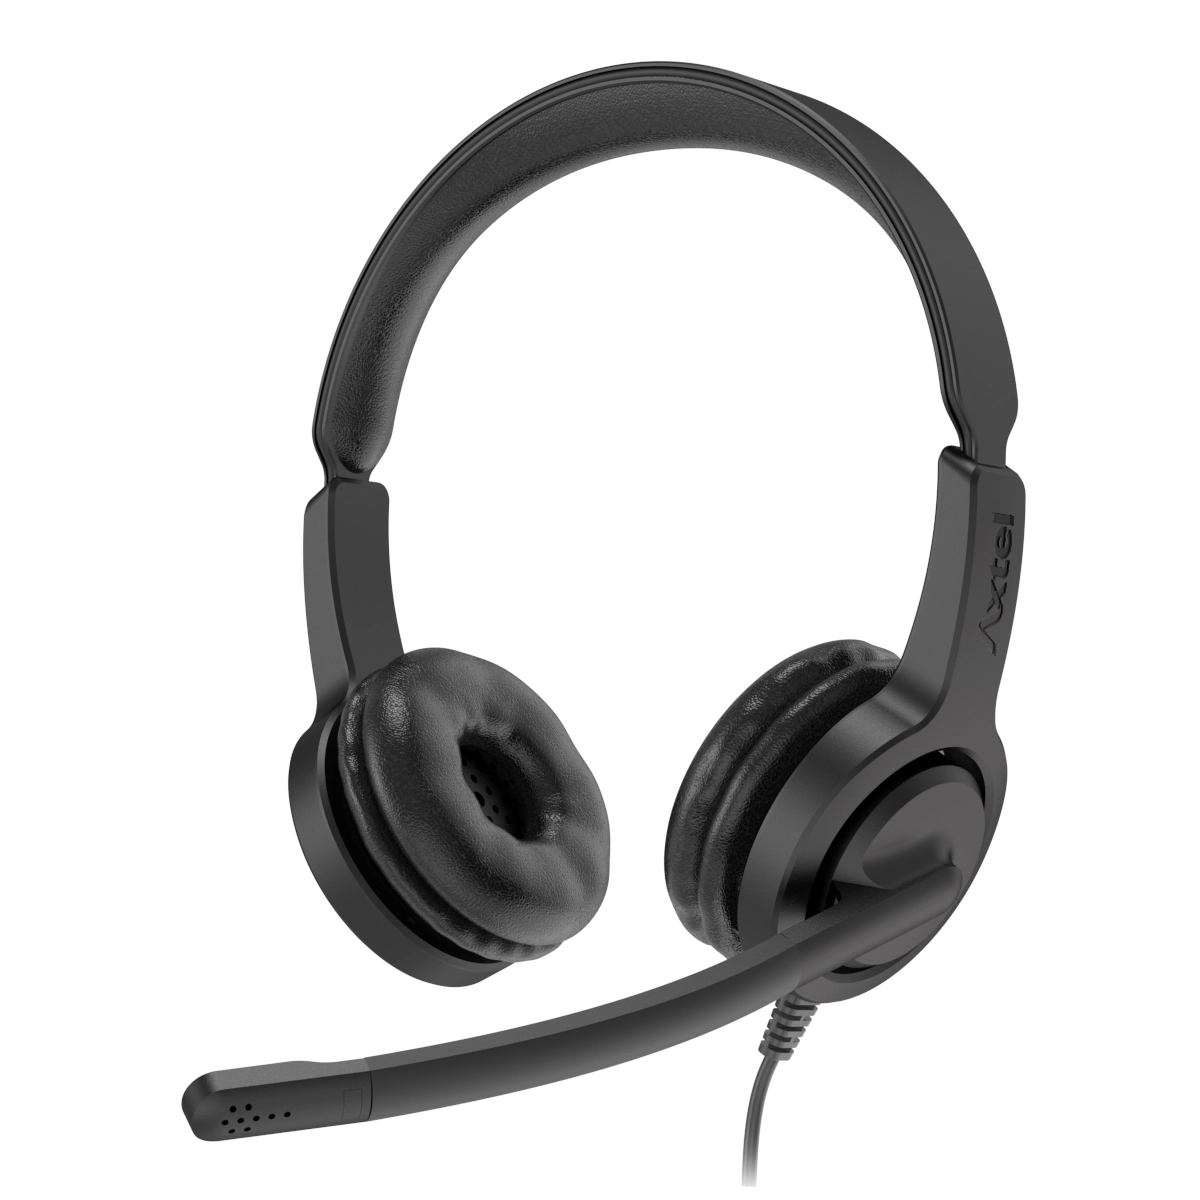 Headsets - VOICE USB28 HD duo NC